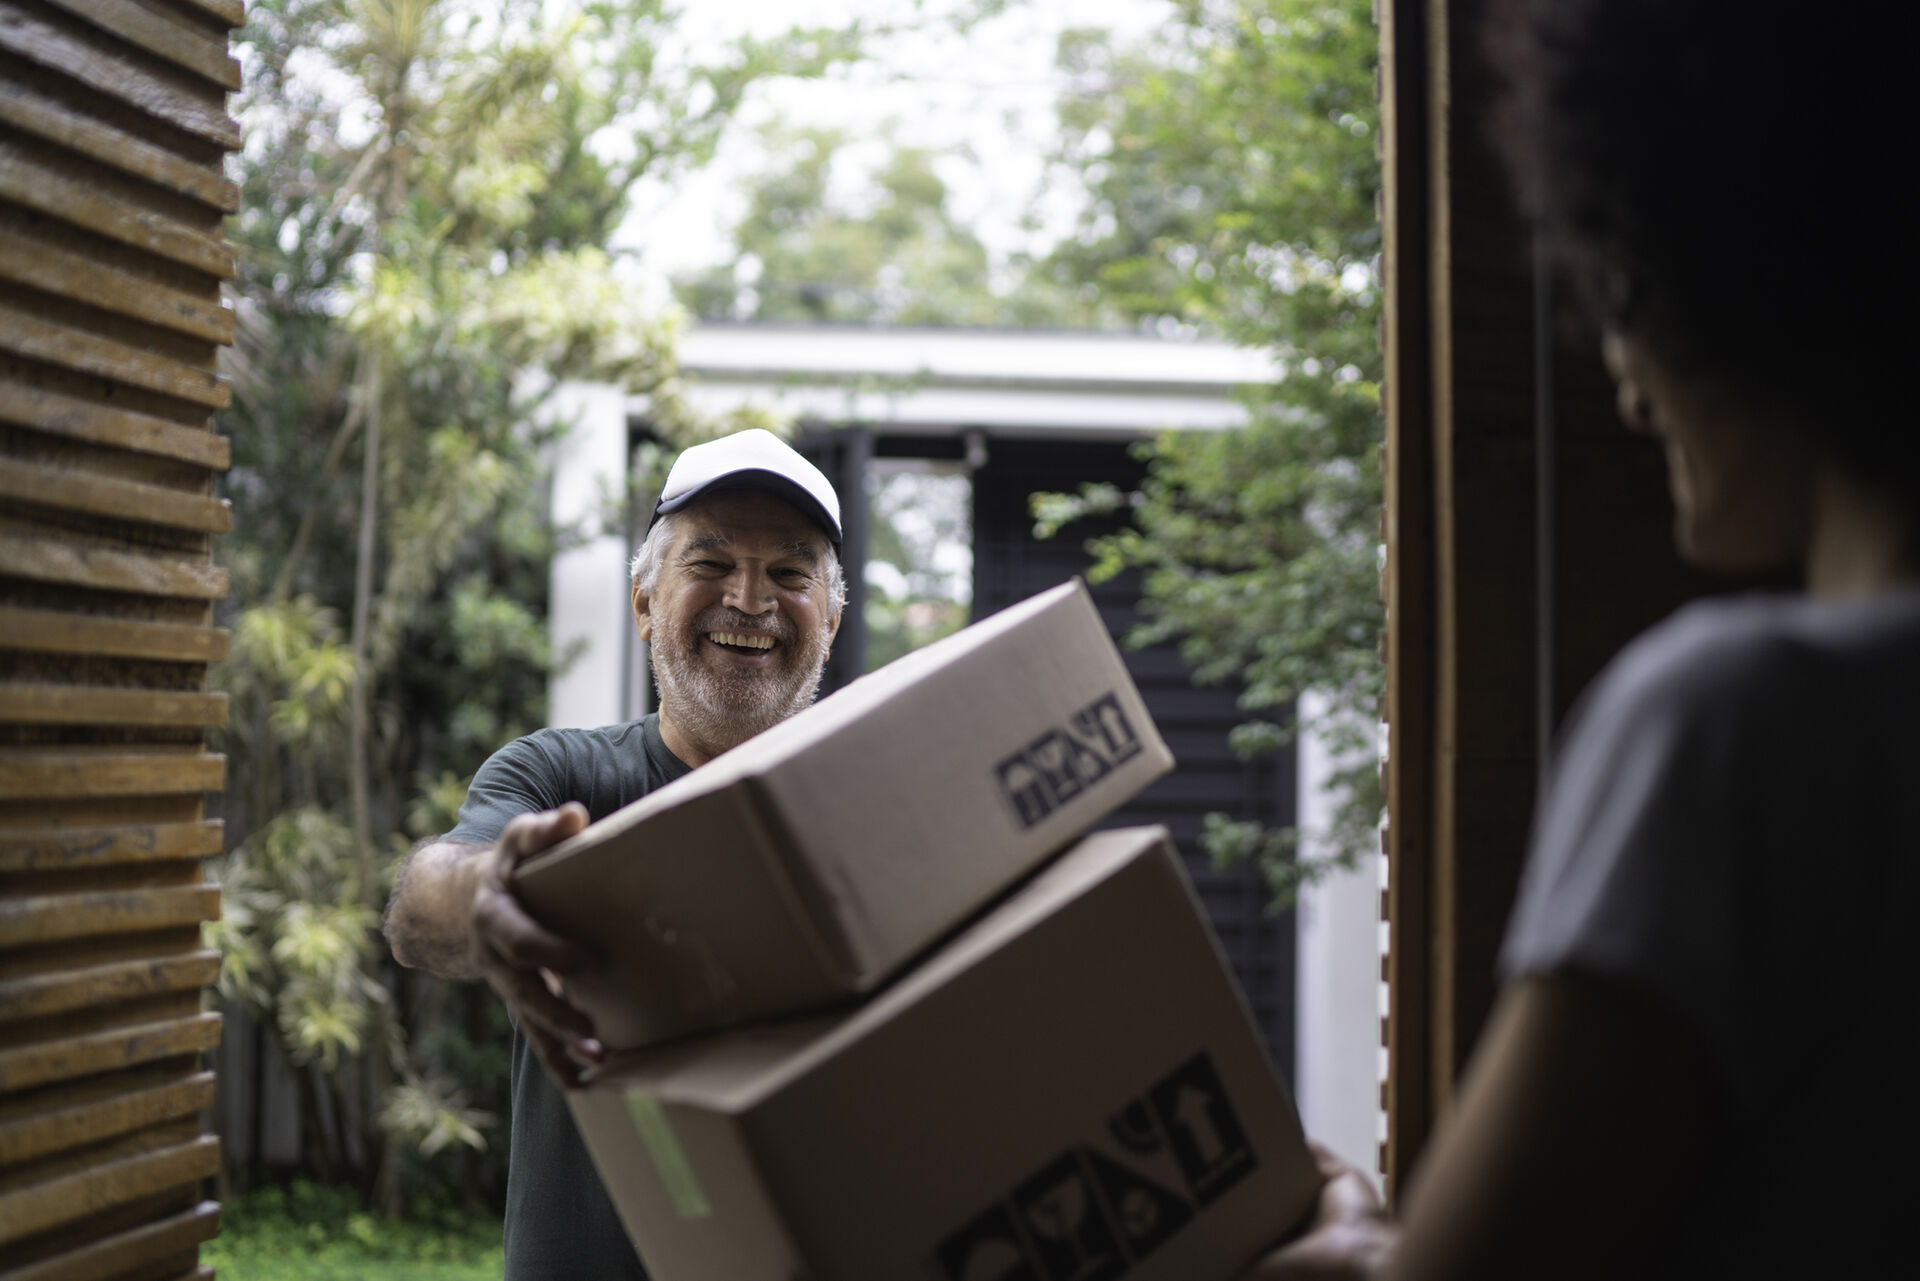 A parcel delivery service delivers packages to a young man at his doorstep.